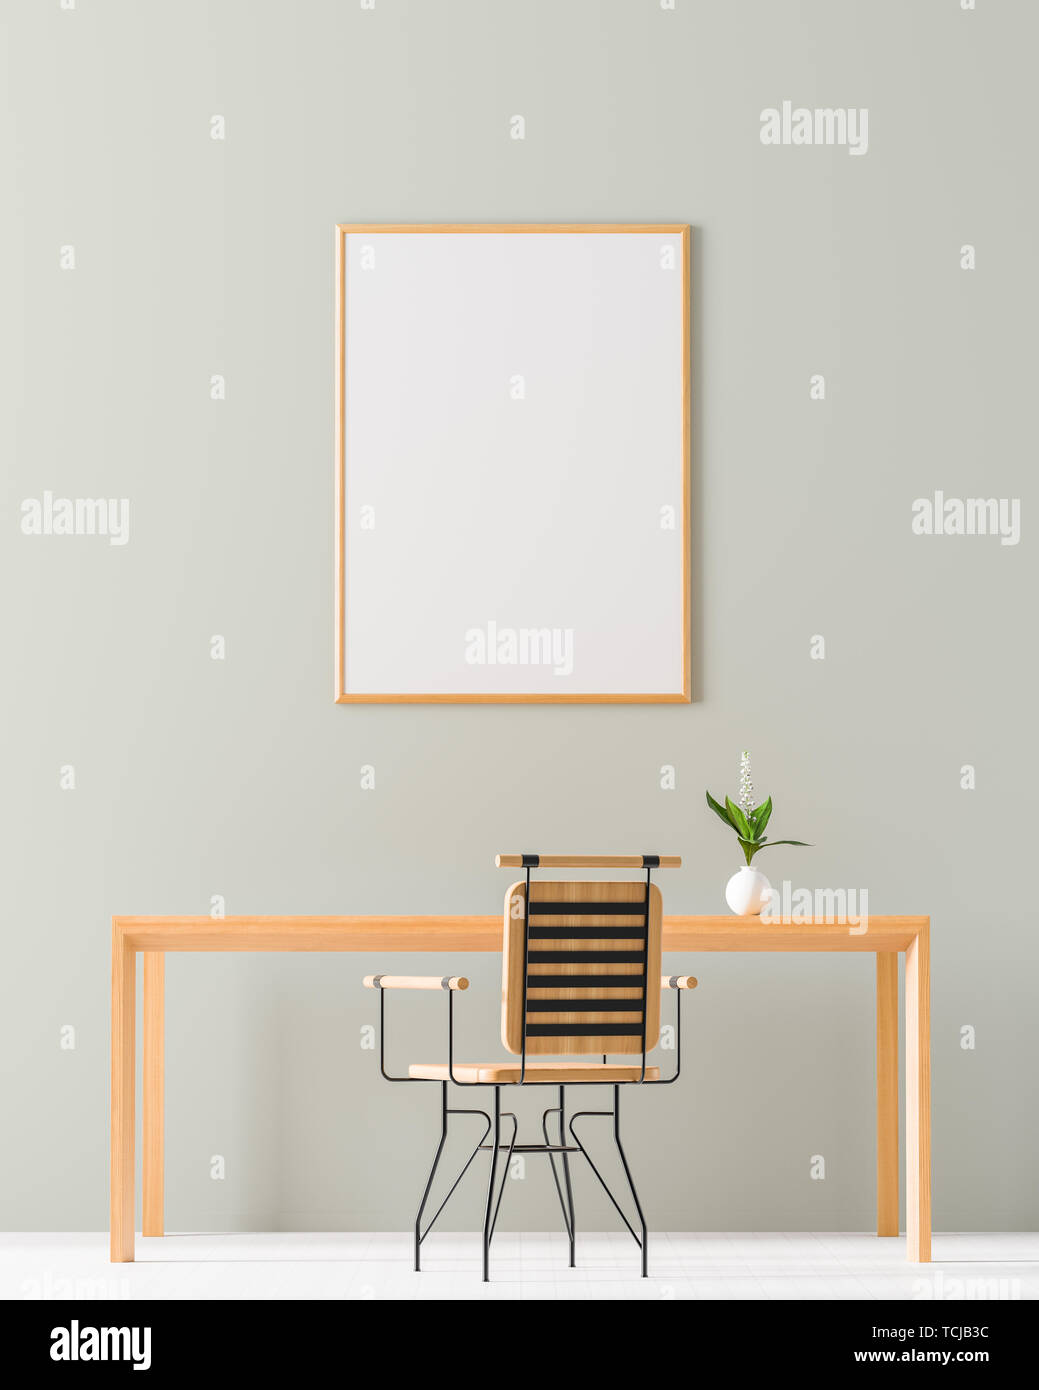 Mock up poster frame in minimalist workspace. Minimalist room design with wooden table and chair. 3D illustration. Stock Photo